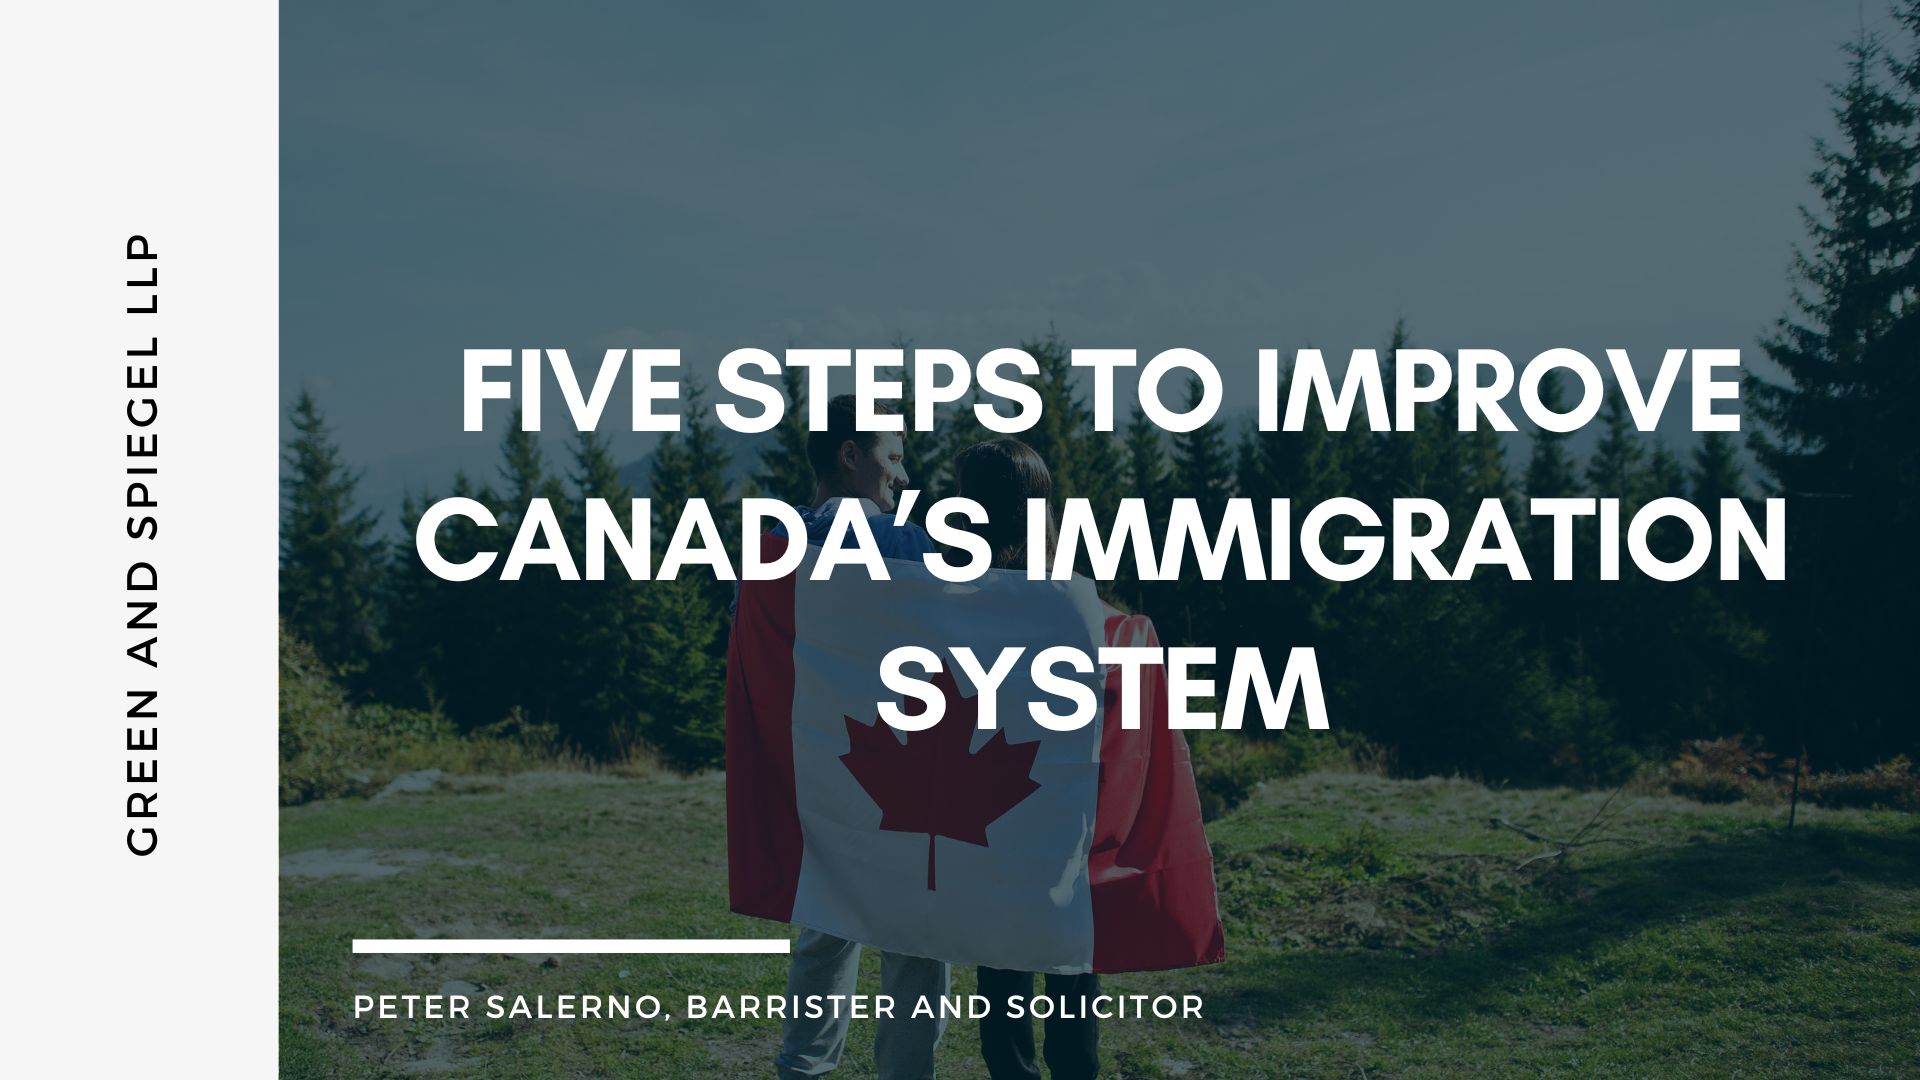 Five Steps to Improve Canada’s Immigration System